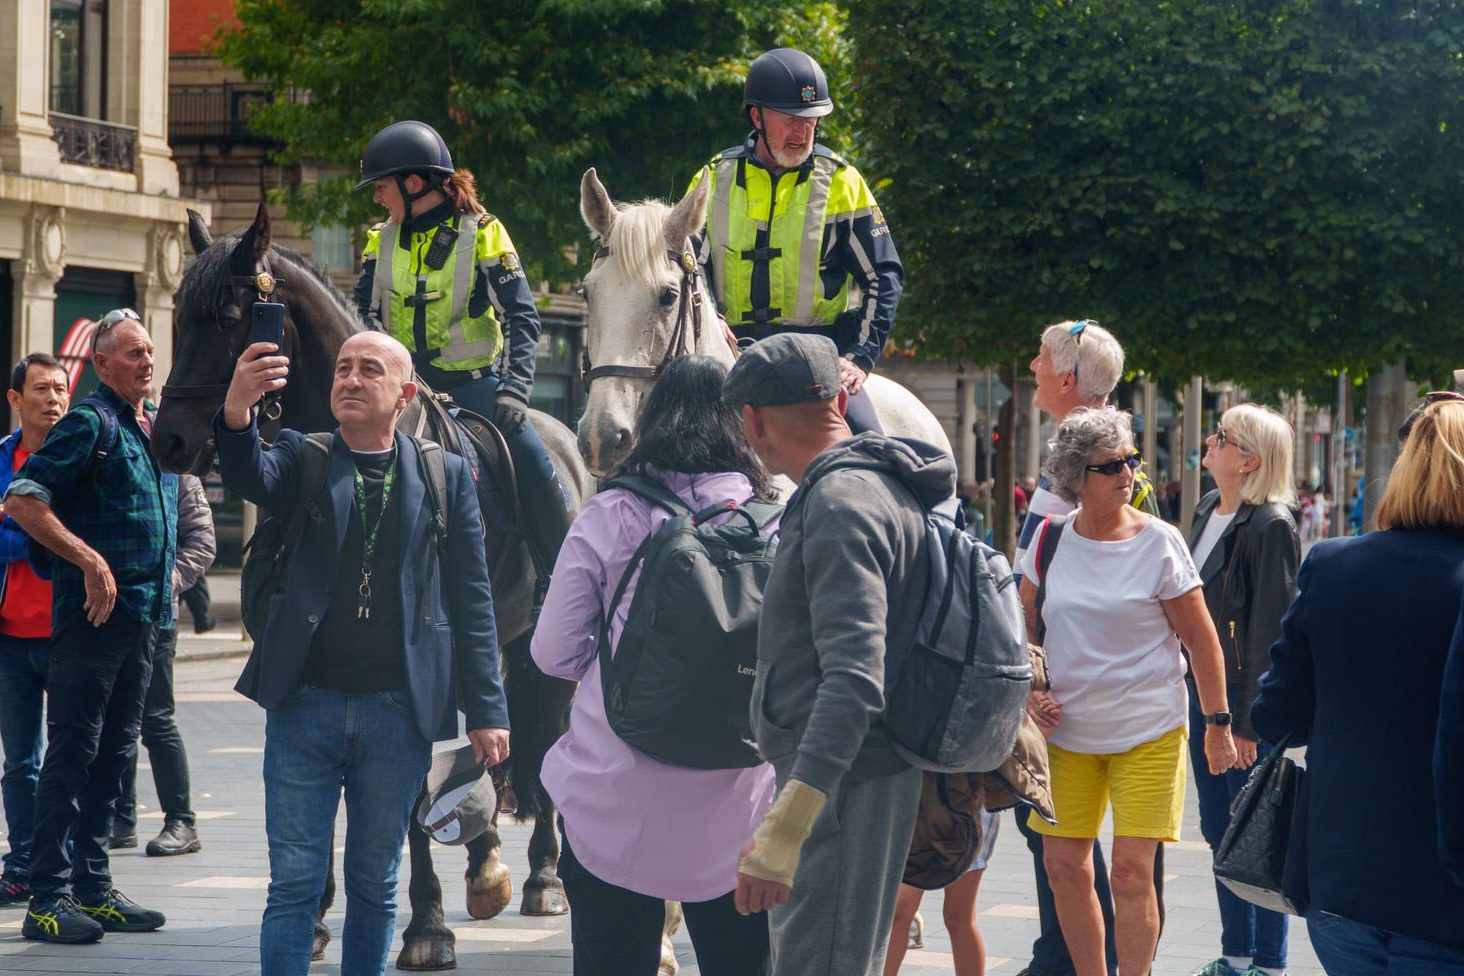 THE MINISTER RESPONSIBLE PROMISED ADDITIONAL POLICING [THEY HAVE ARRIVED WITH THEIR HORSES IN O'CONNELL STREET] 001